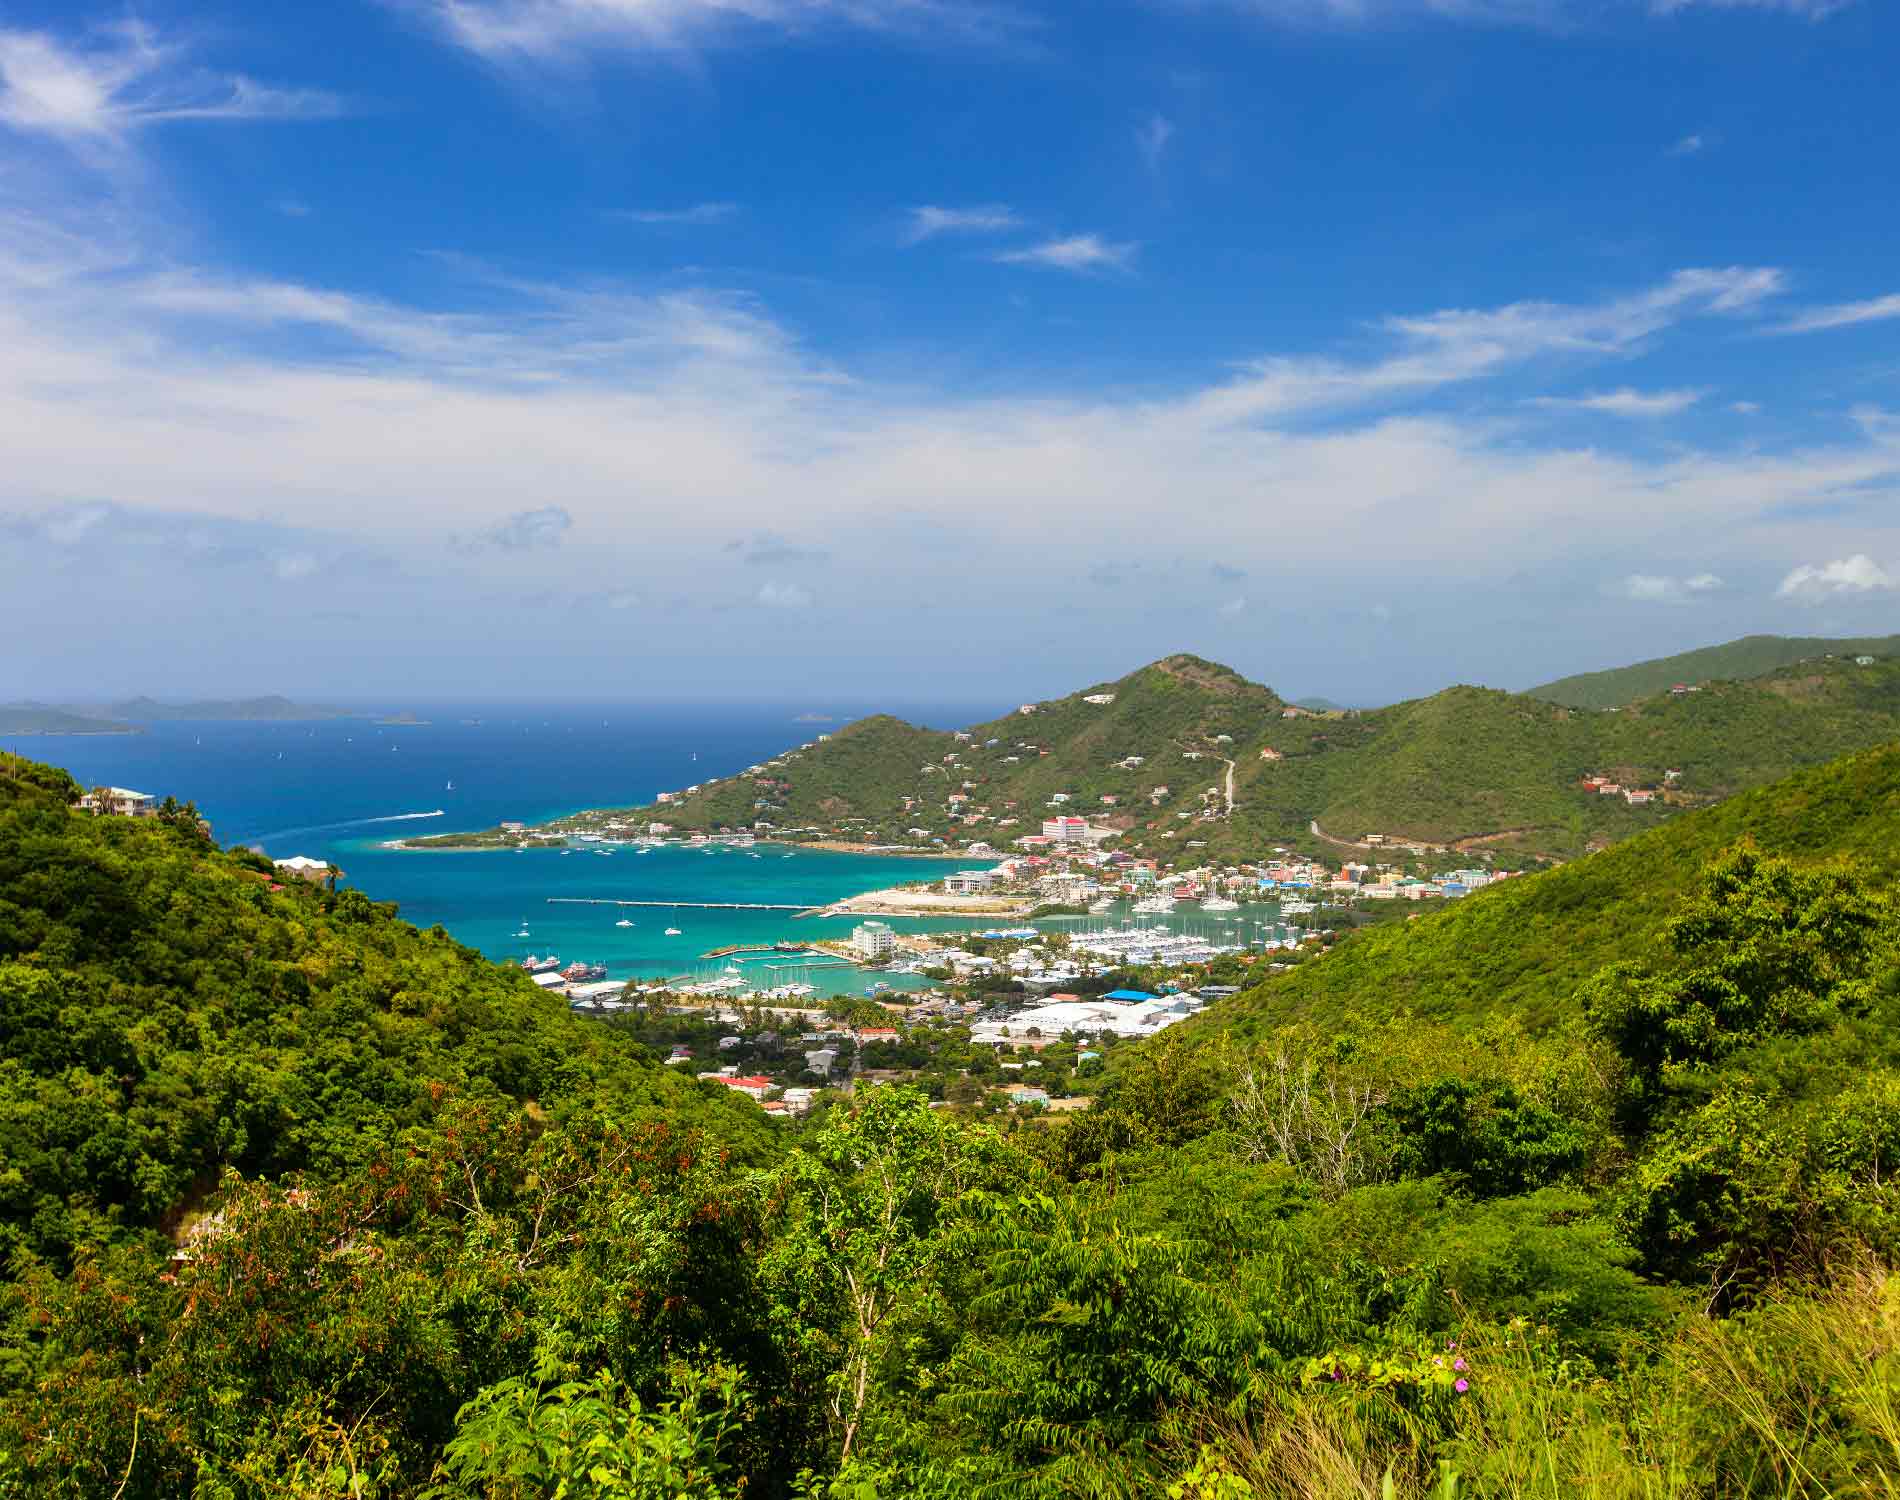 /-/media/images/website/background-images/offices/british-virgin-islands/british-virgin-islands-tortola.ashx?sc_lang=zh-cn